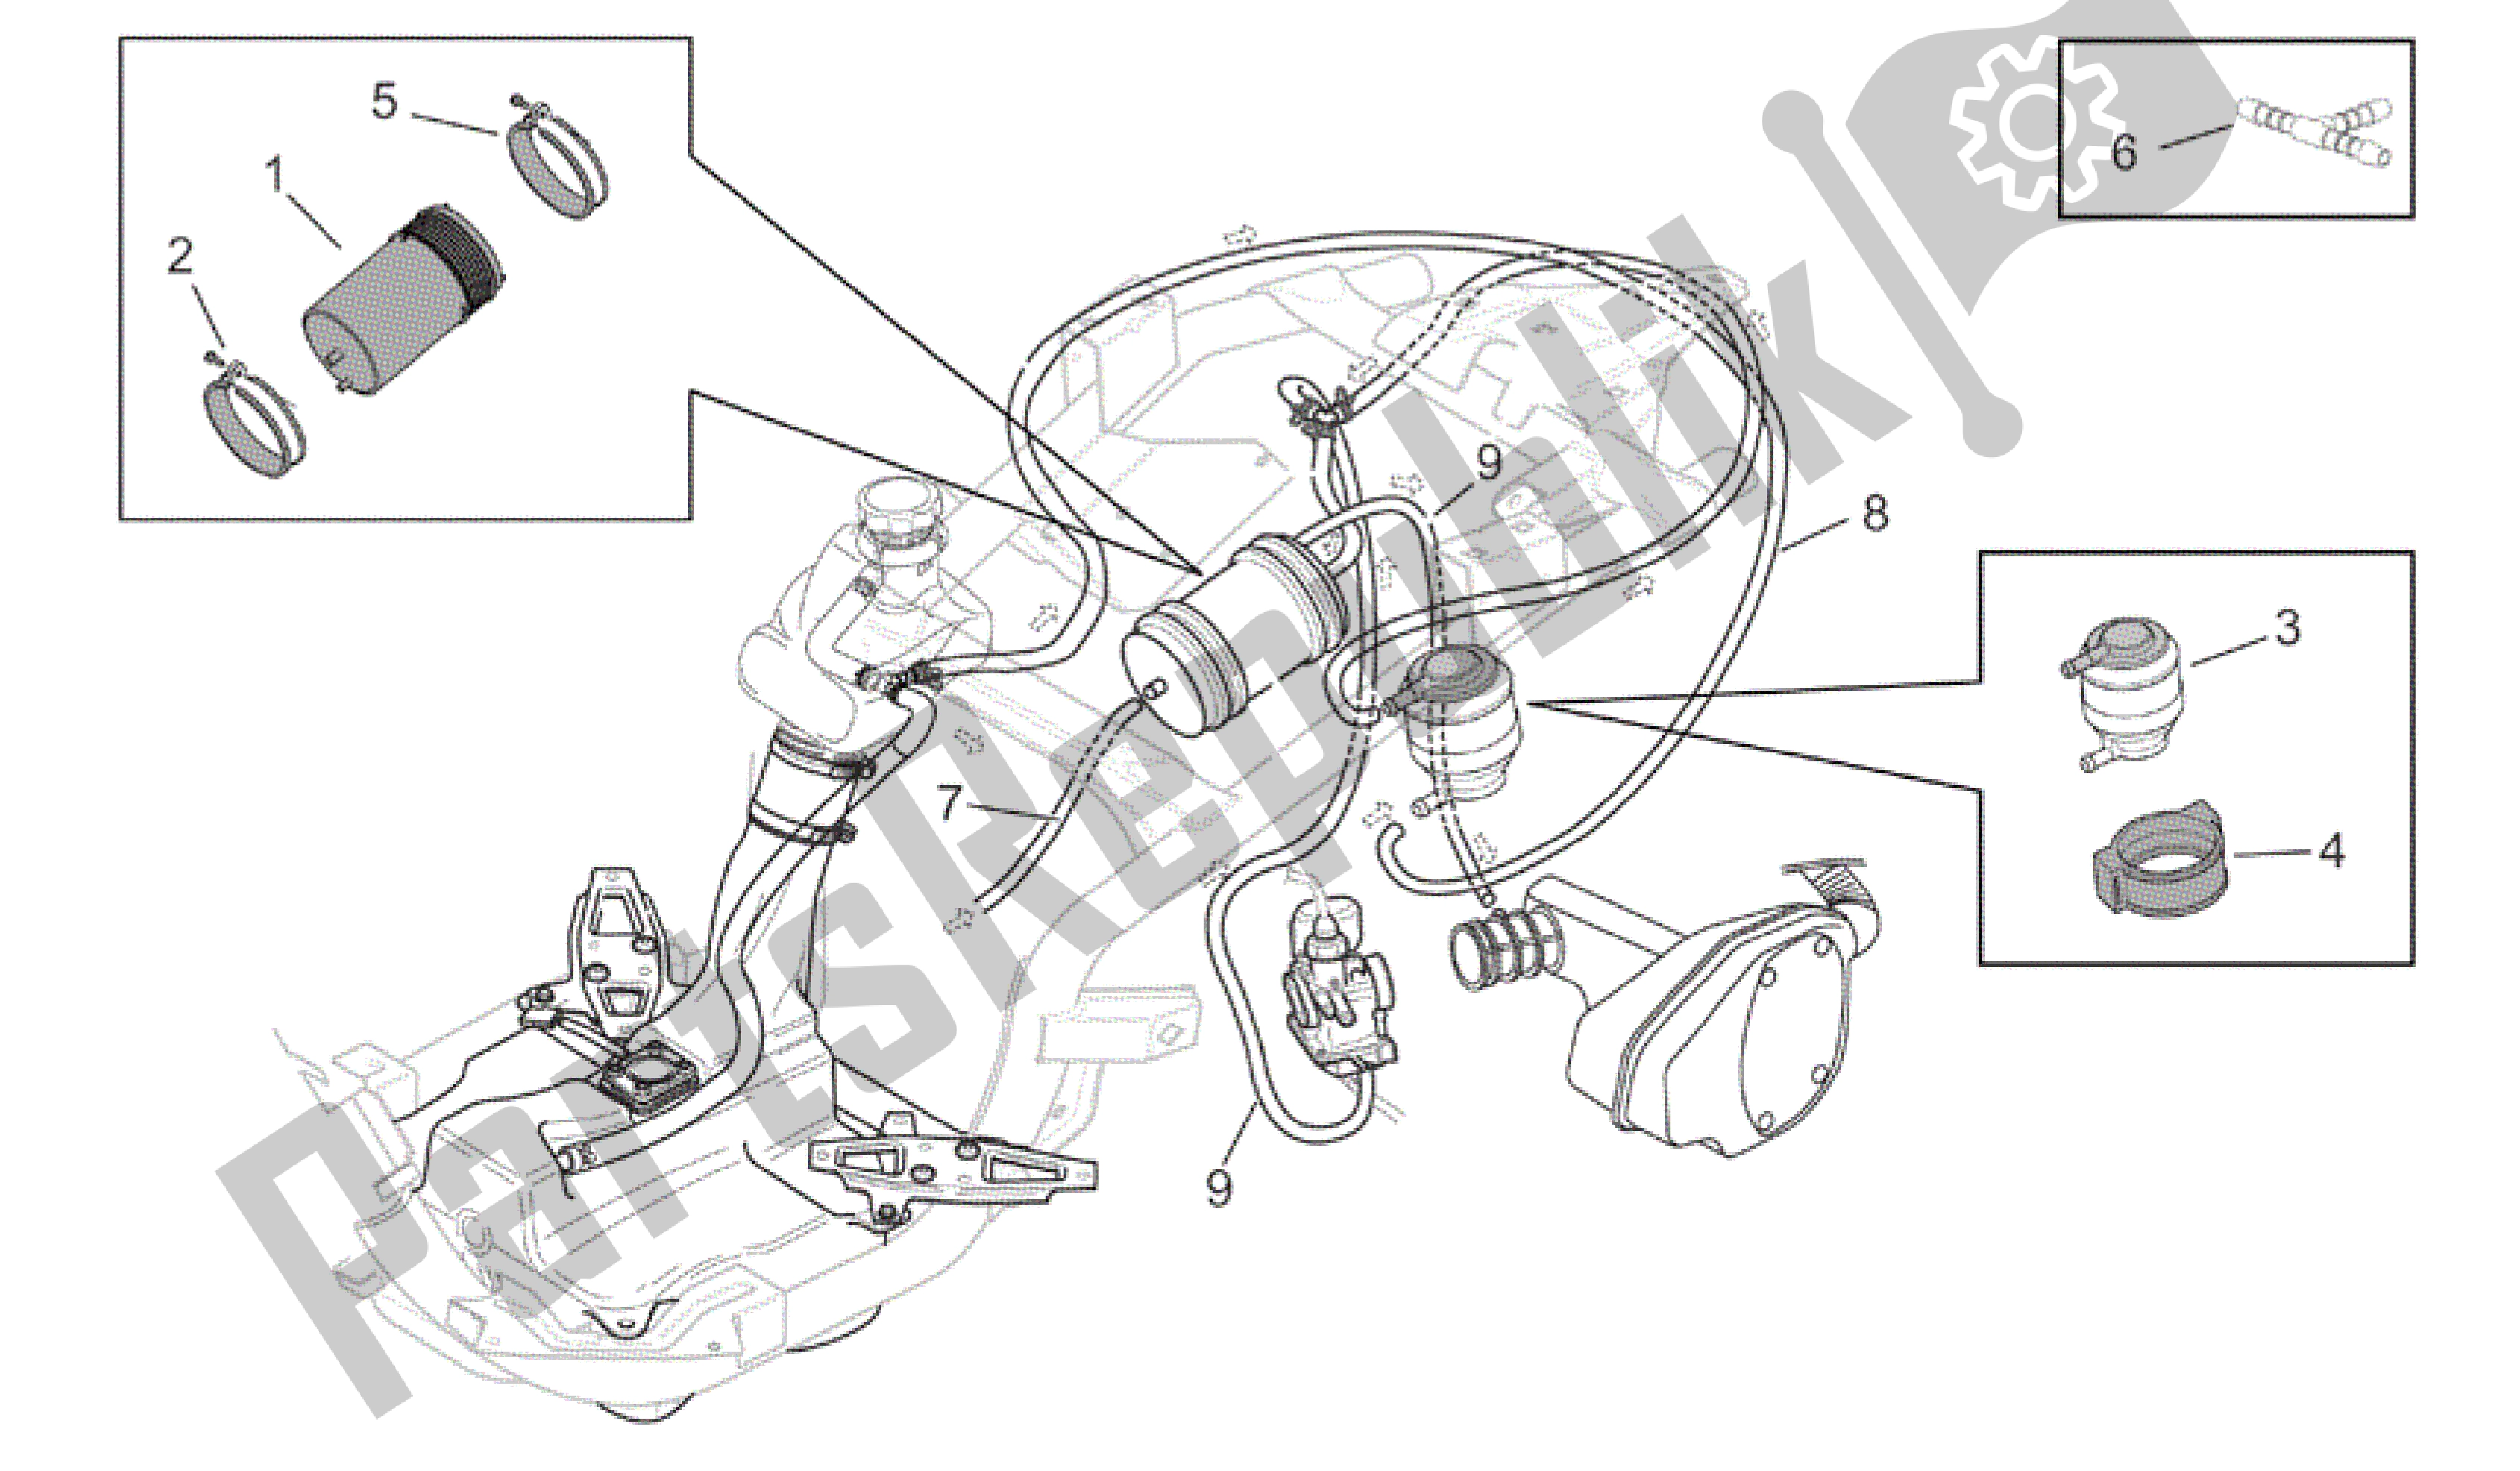 All parts for the Fuel Vapour Recover System of the Aprilia Mojito 125 2003 - 2007